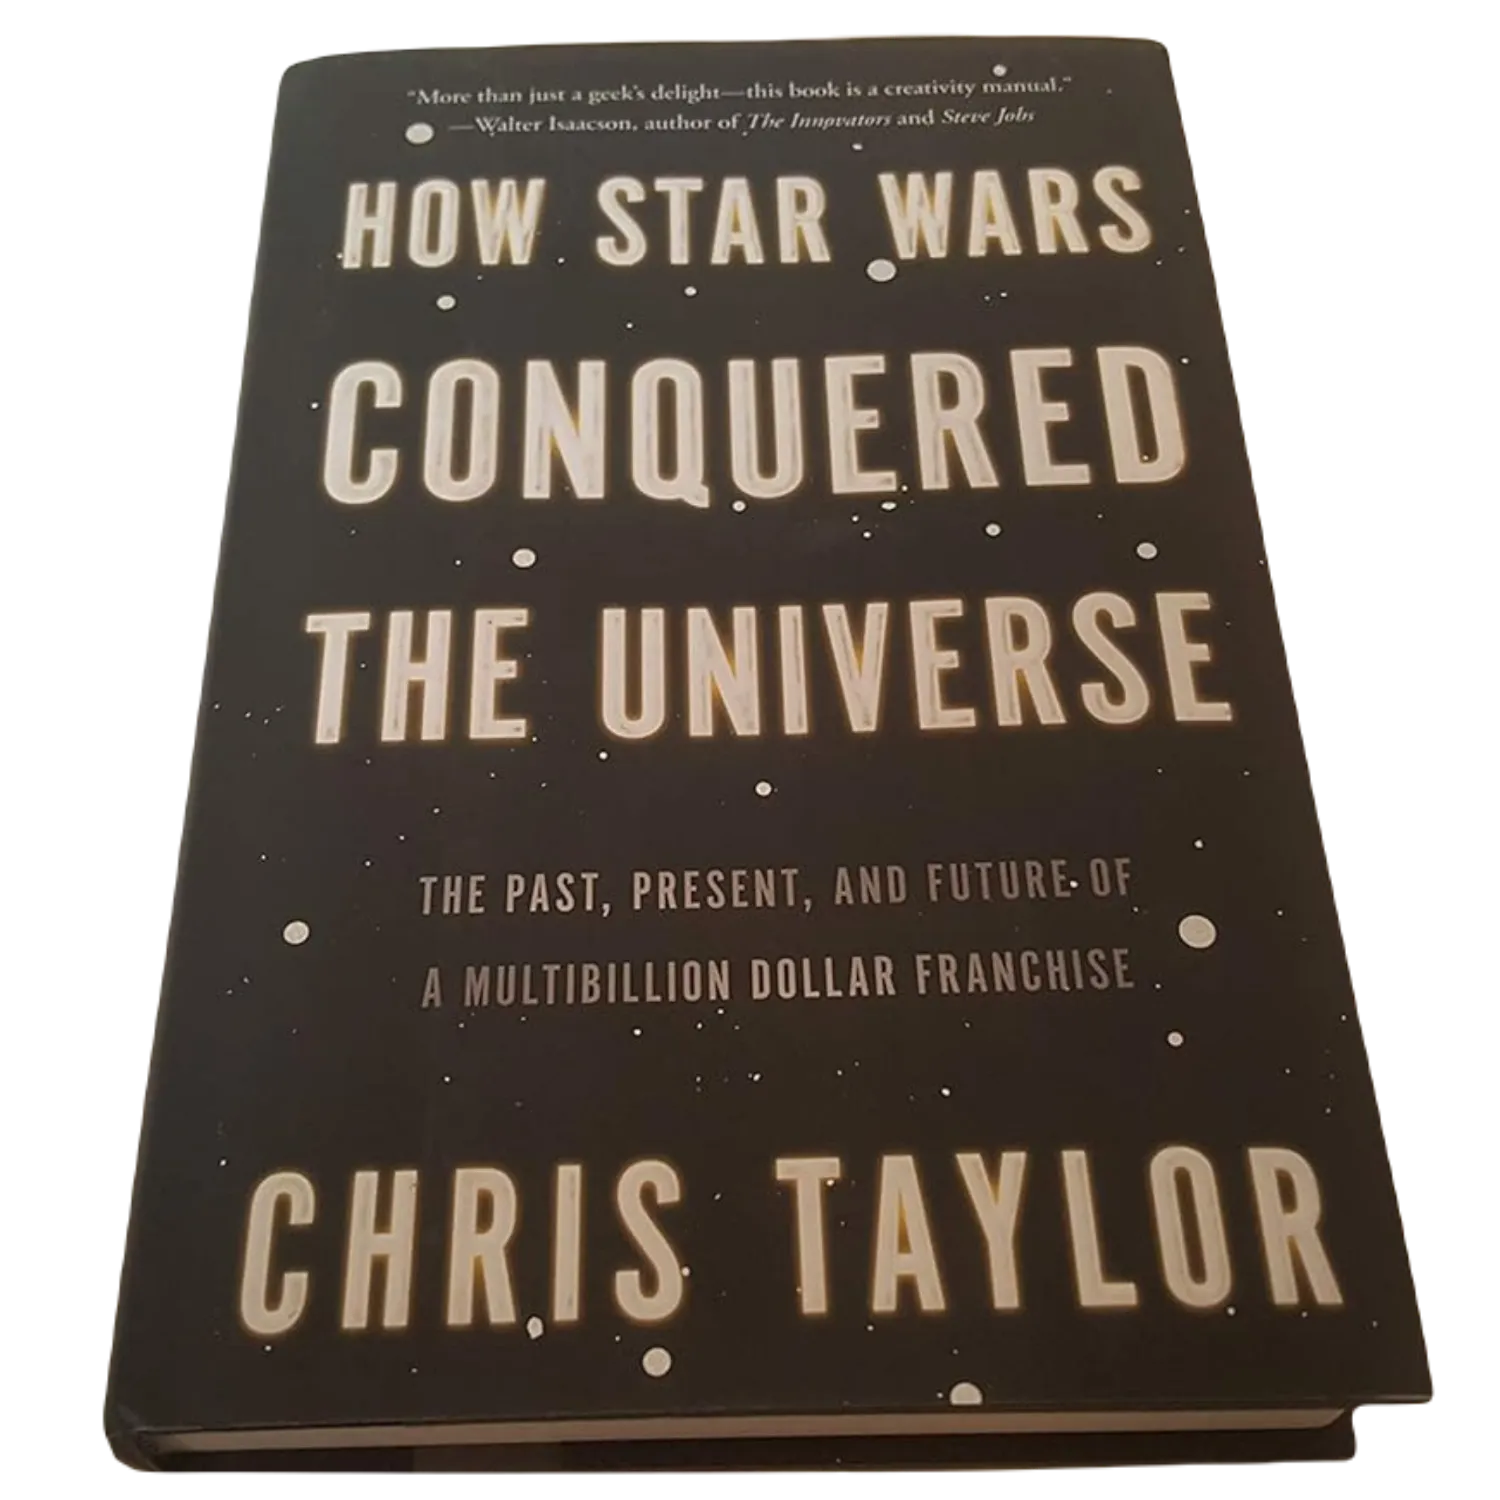 How Star Wars Conquered the Universe: The Past, Present, and Future of a Multibillion Dollar Franchise by Chris Taylor (2014)